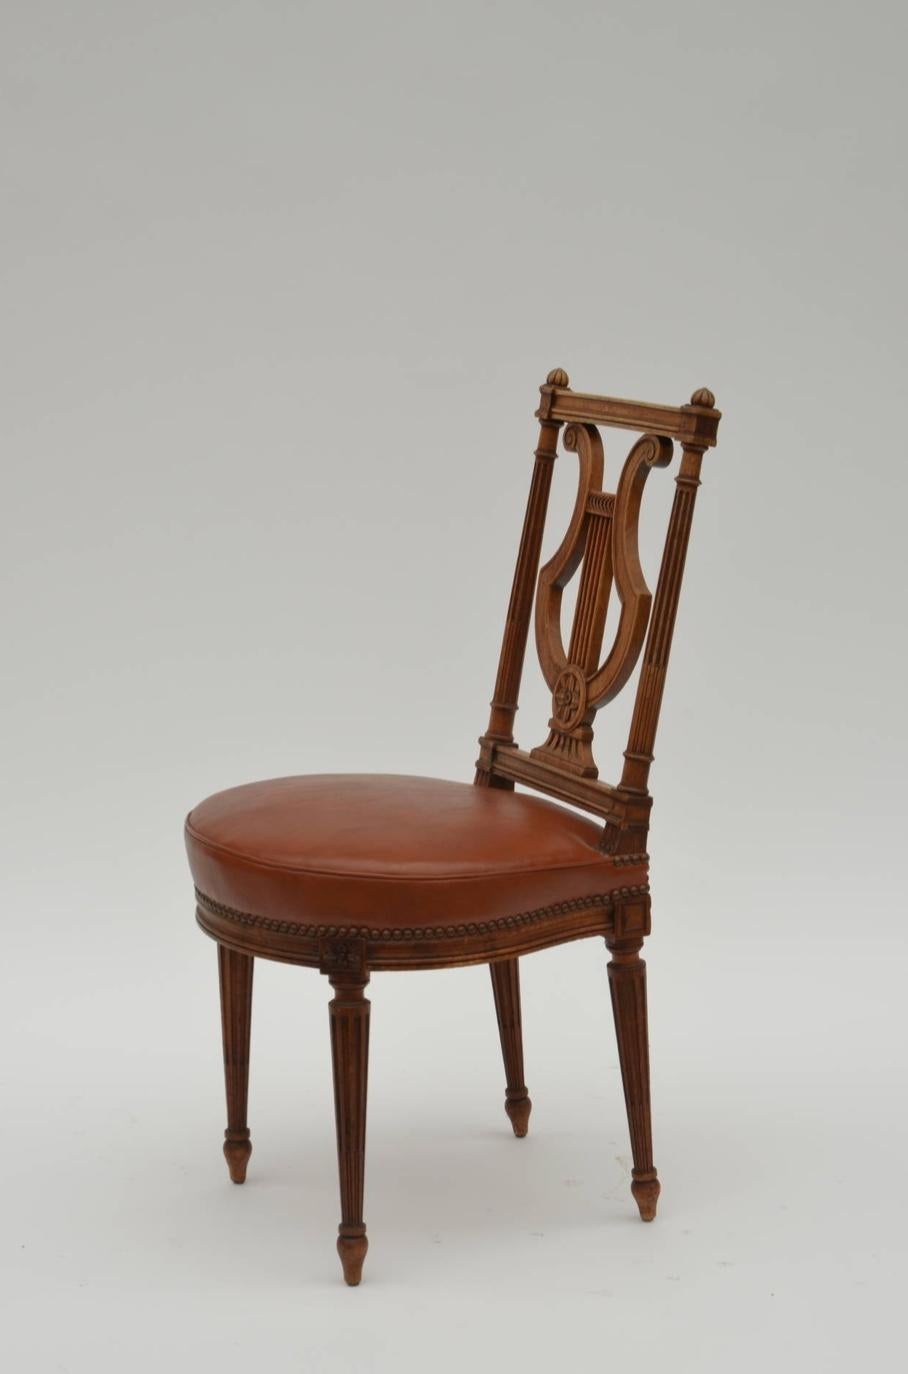 Neoclassical Revival Elegant Neoclassical Side Chair by Maison Jansen